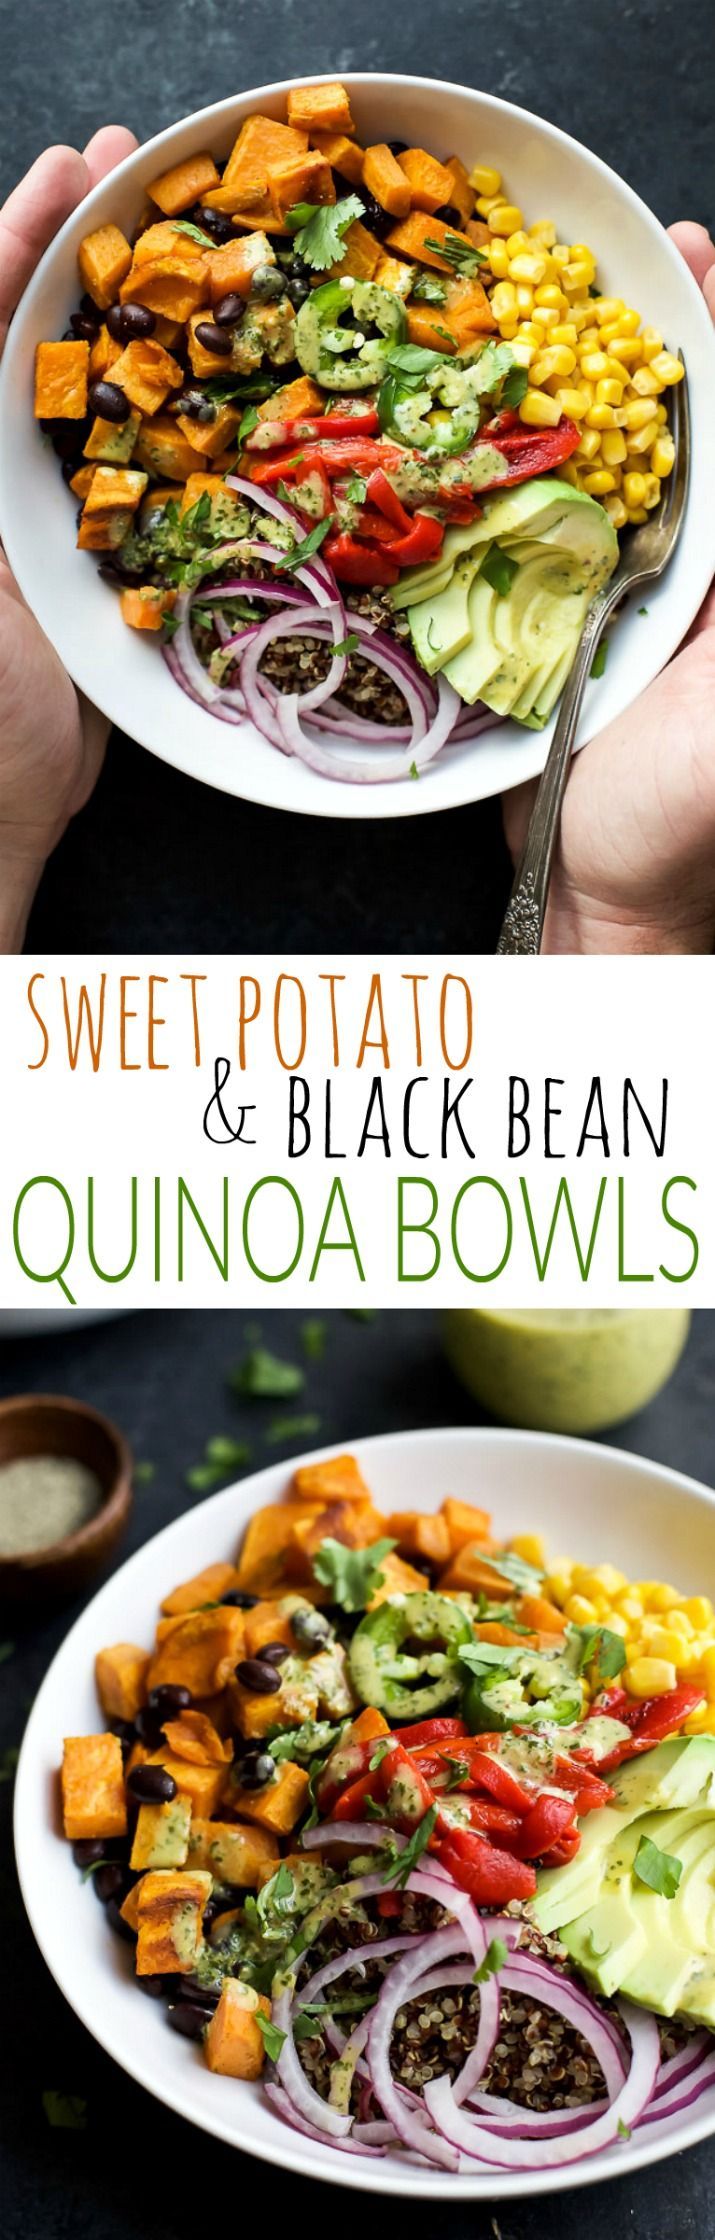 Easy SWEET POTATO BLACK BEAN QUINOA BOWLS topped with a zesty Cilantro Dressing you’ll want to pour all over. A fresh vegetarian